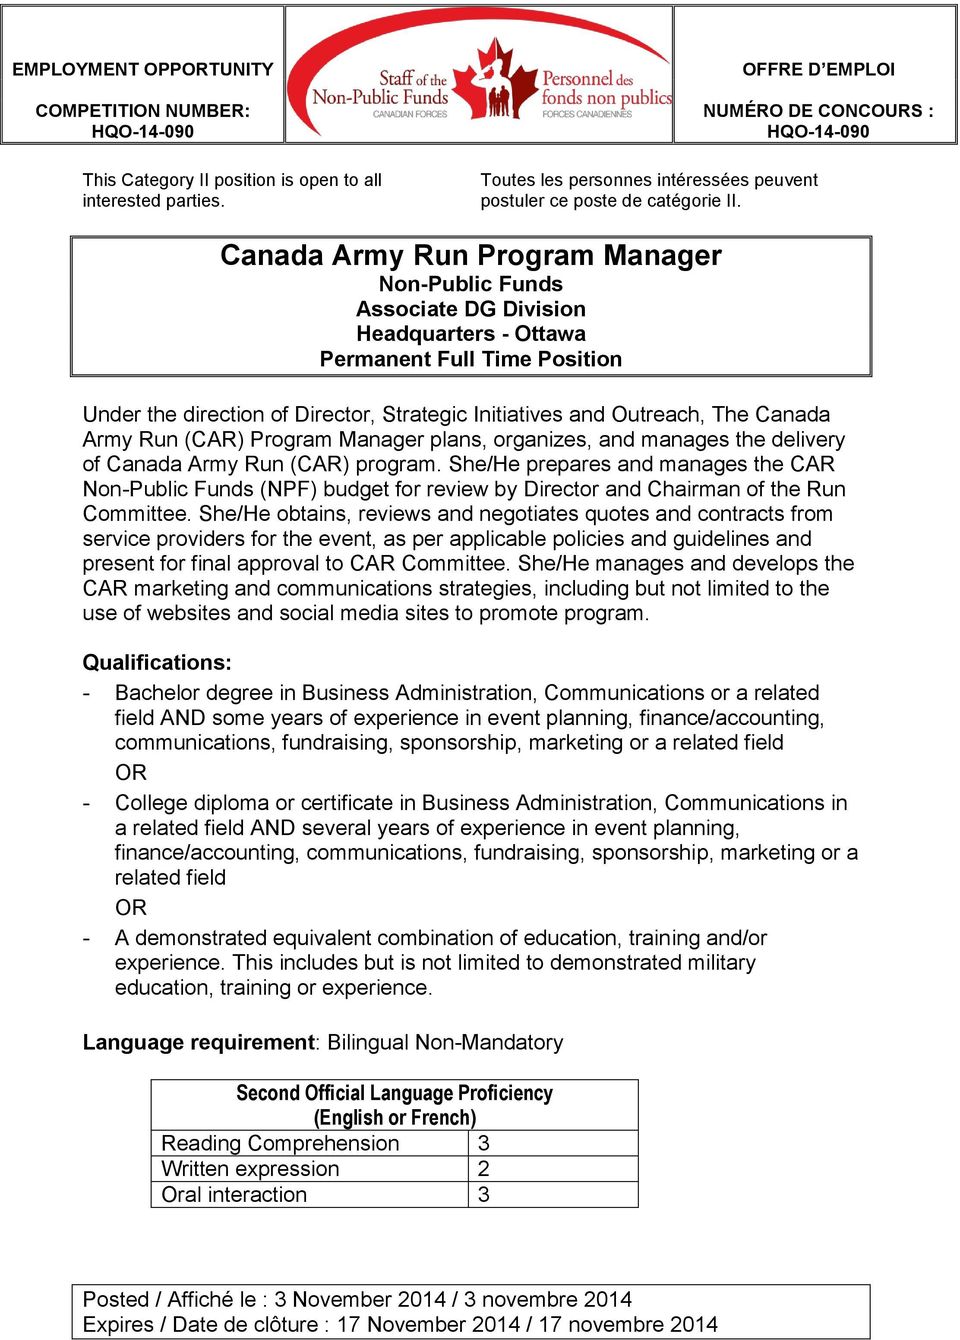 Canada Army Run (CAR) Program Manager plans, organizes, and manages the delivery of Canada Army Run (CAR) program.